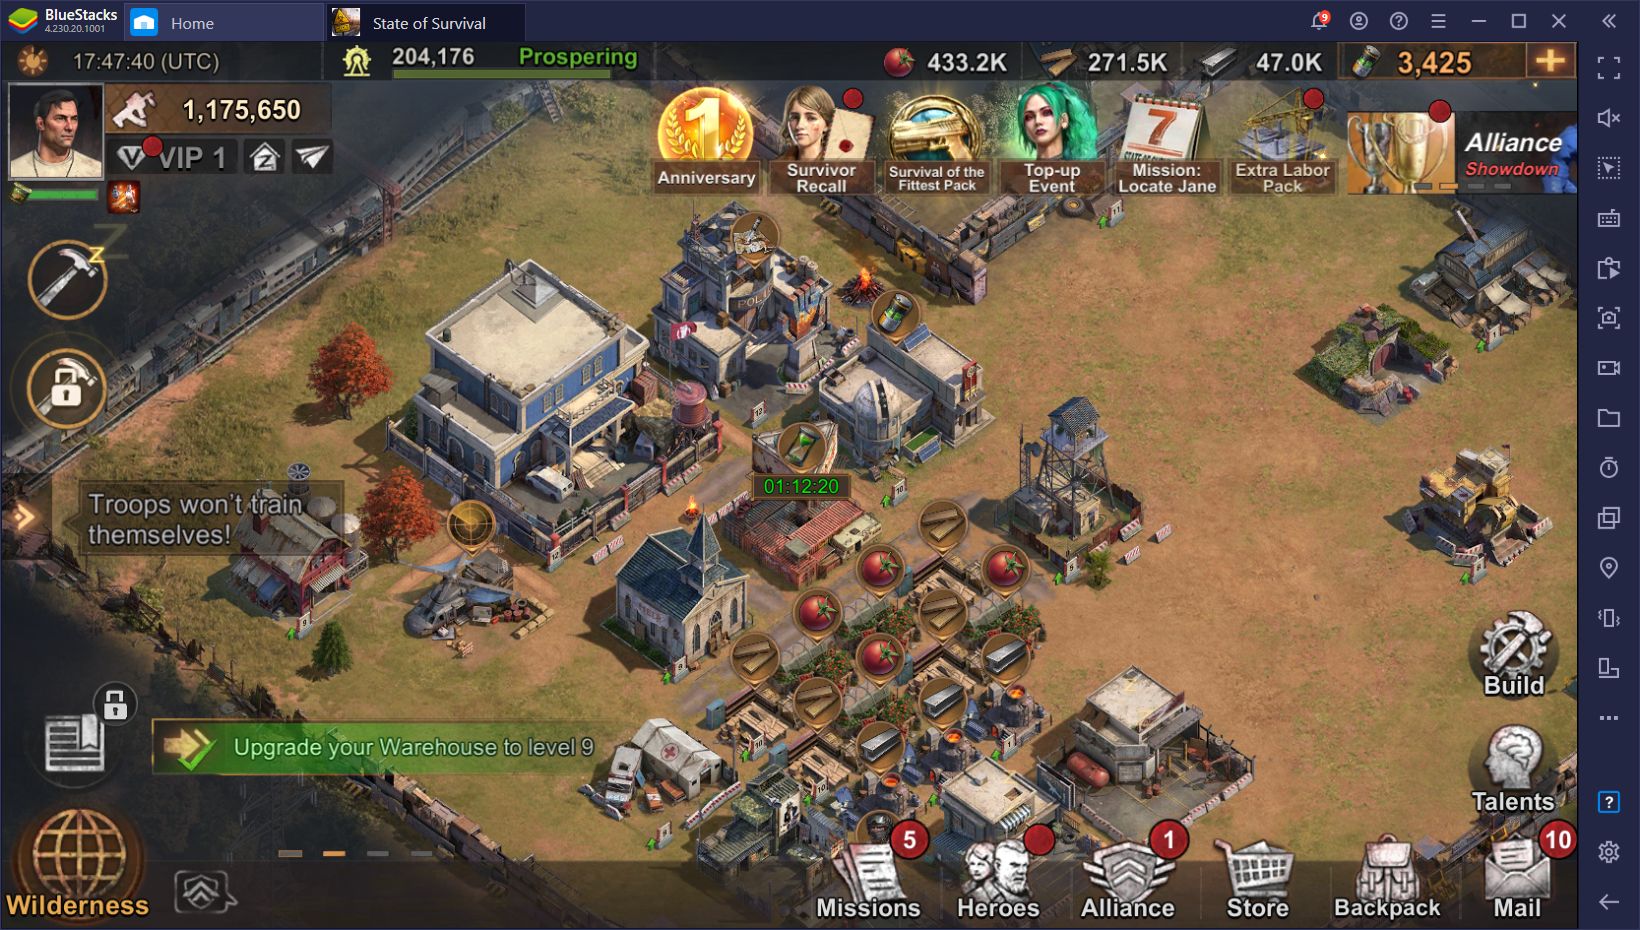 State of Survival Tips to Maximize Resource Farming